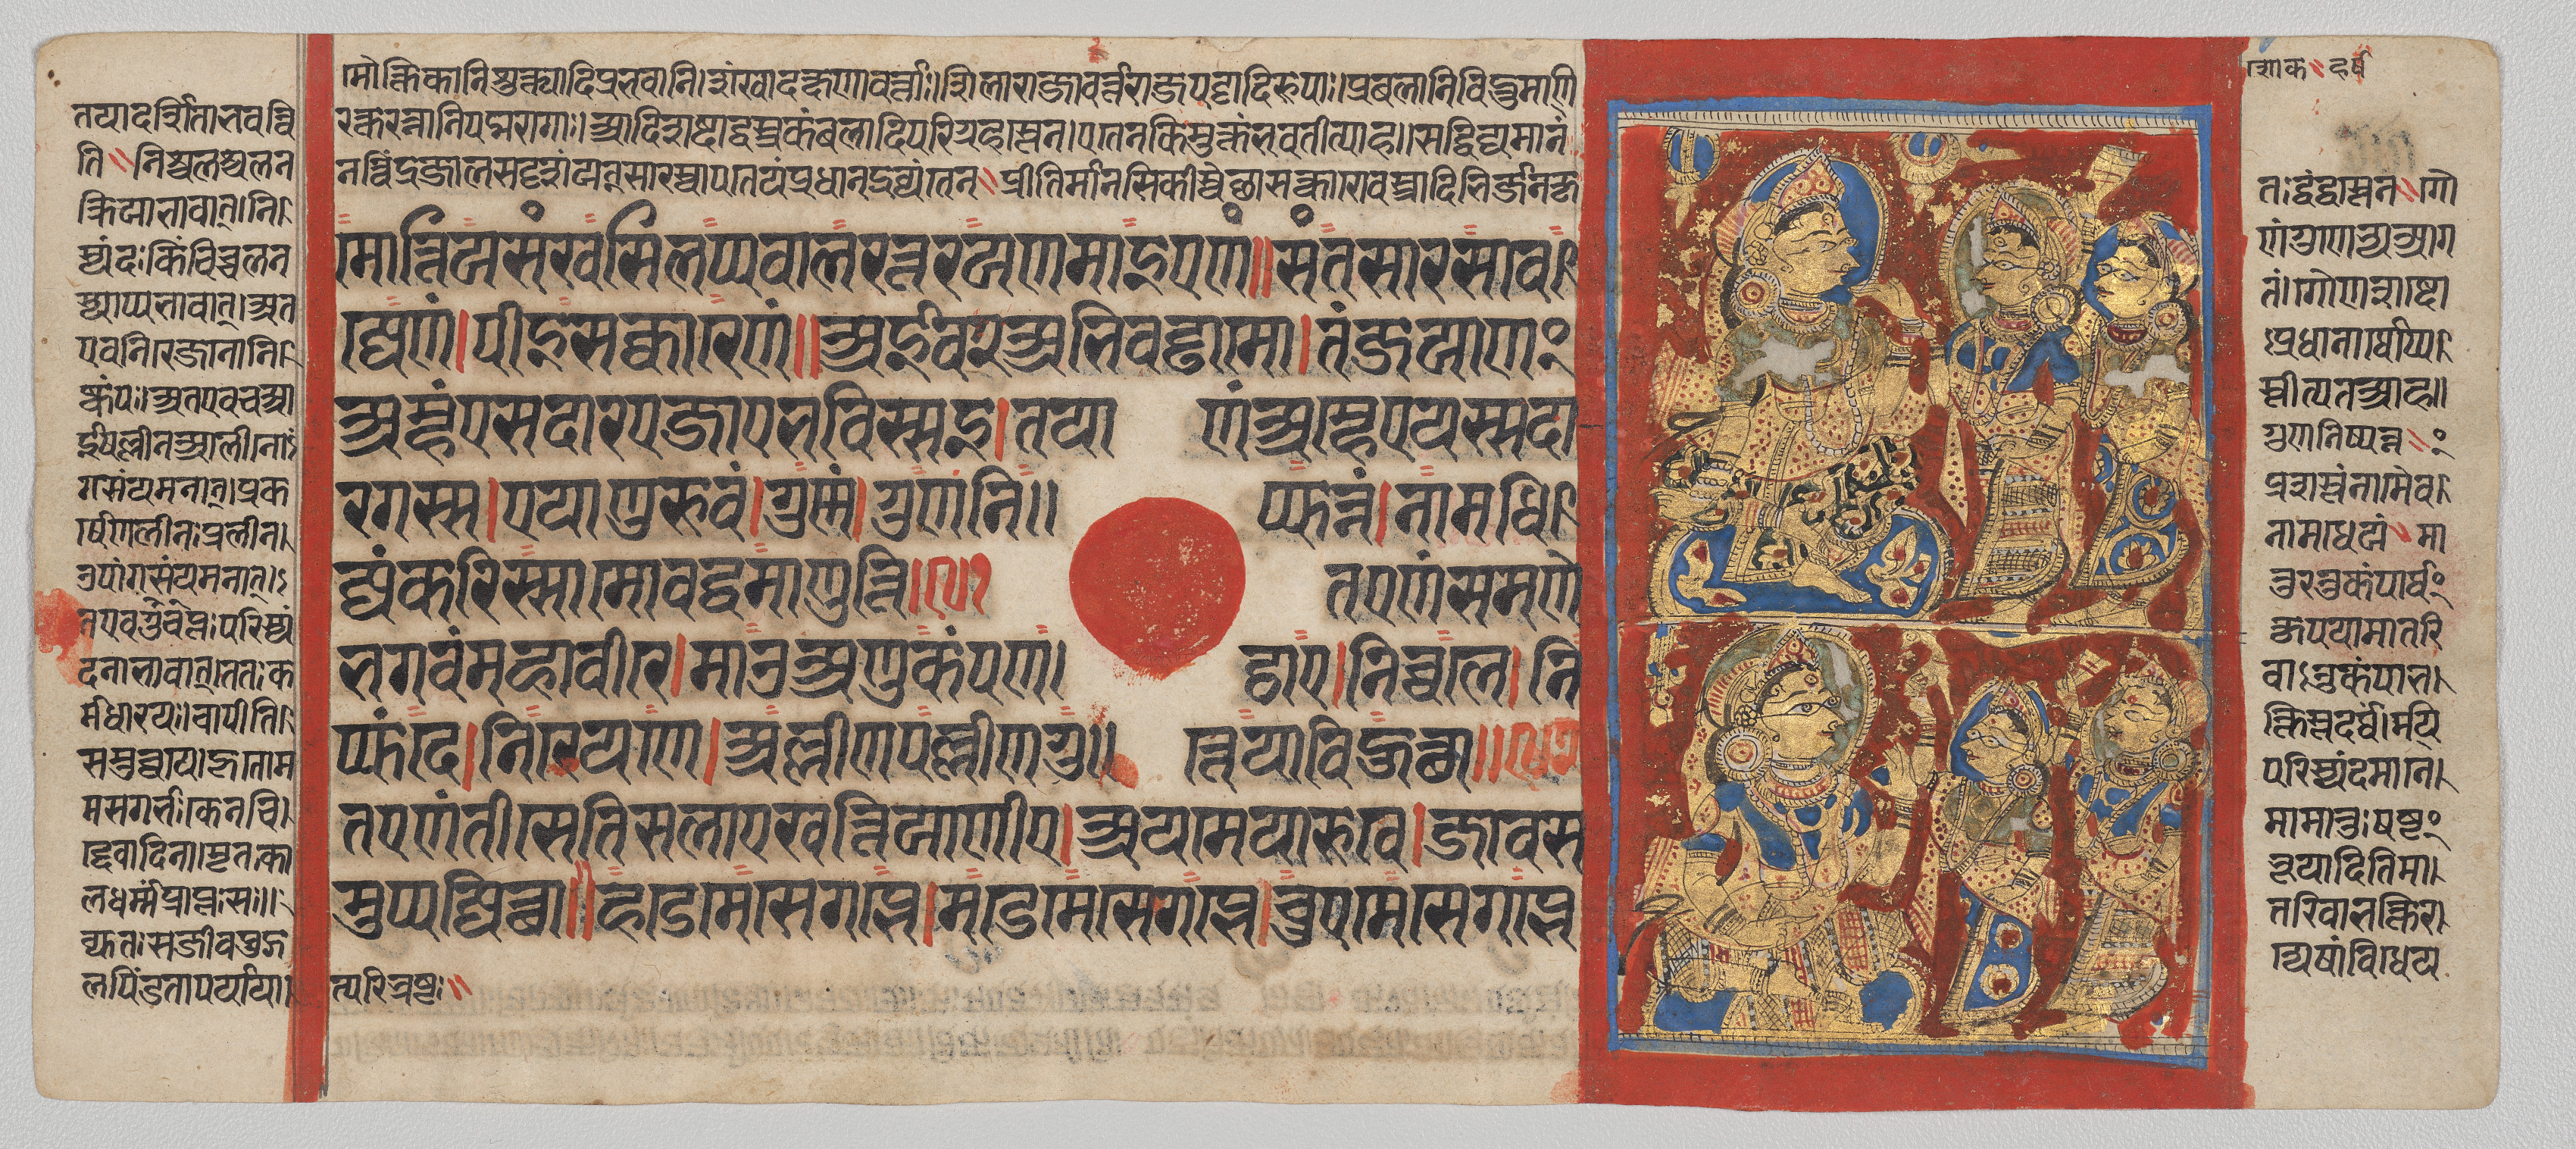 Queen Trishala's Grief and Happiness, Folio 29 (recto), from a Kalpa-sutra